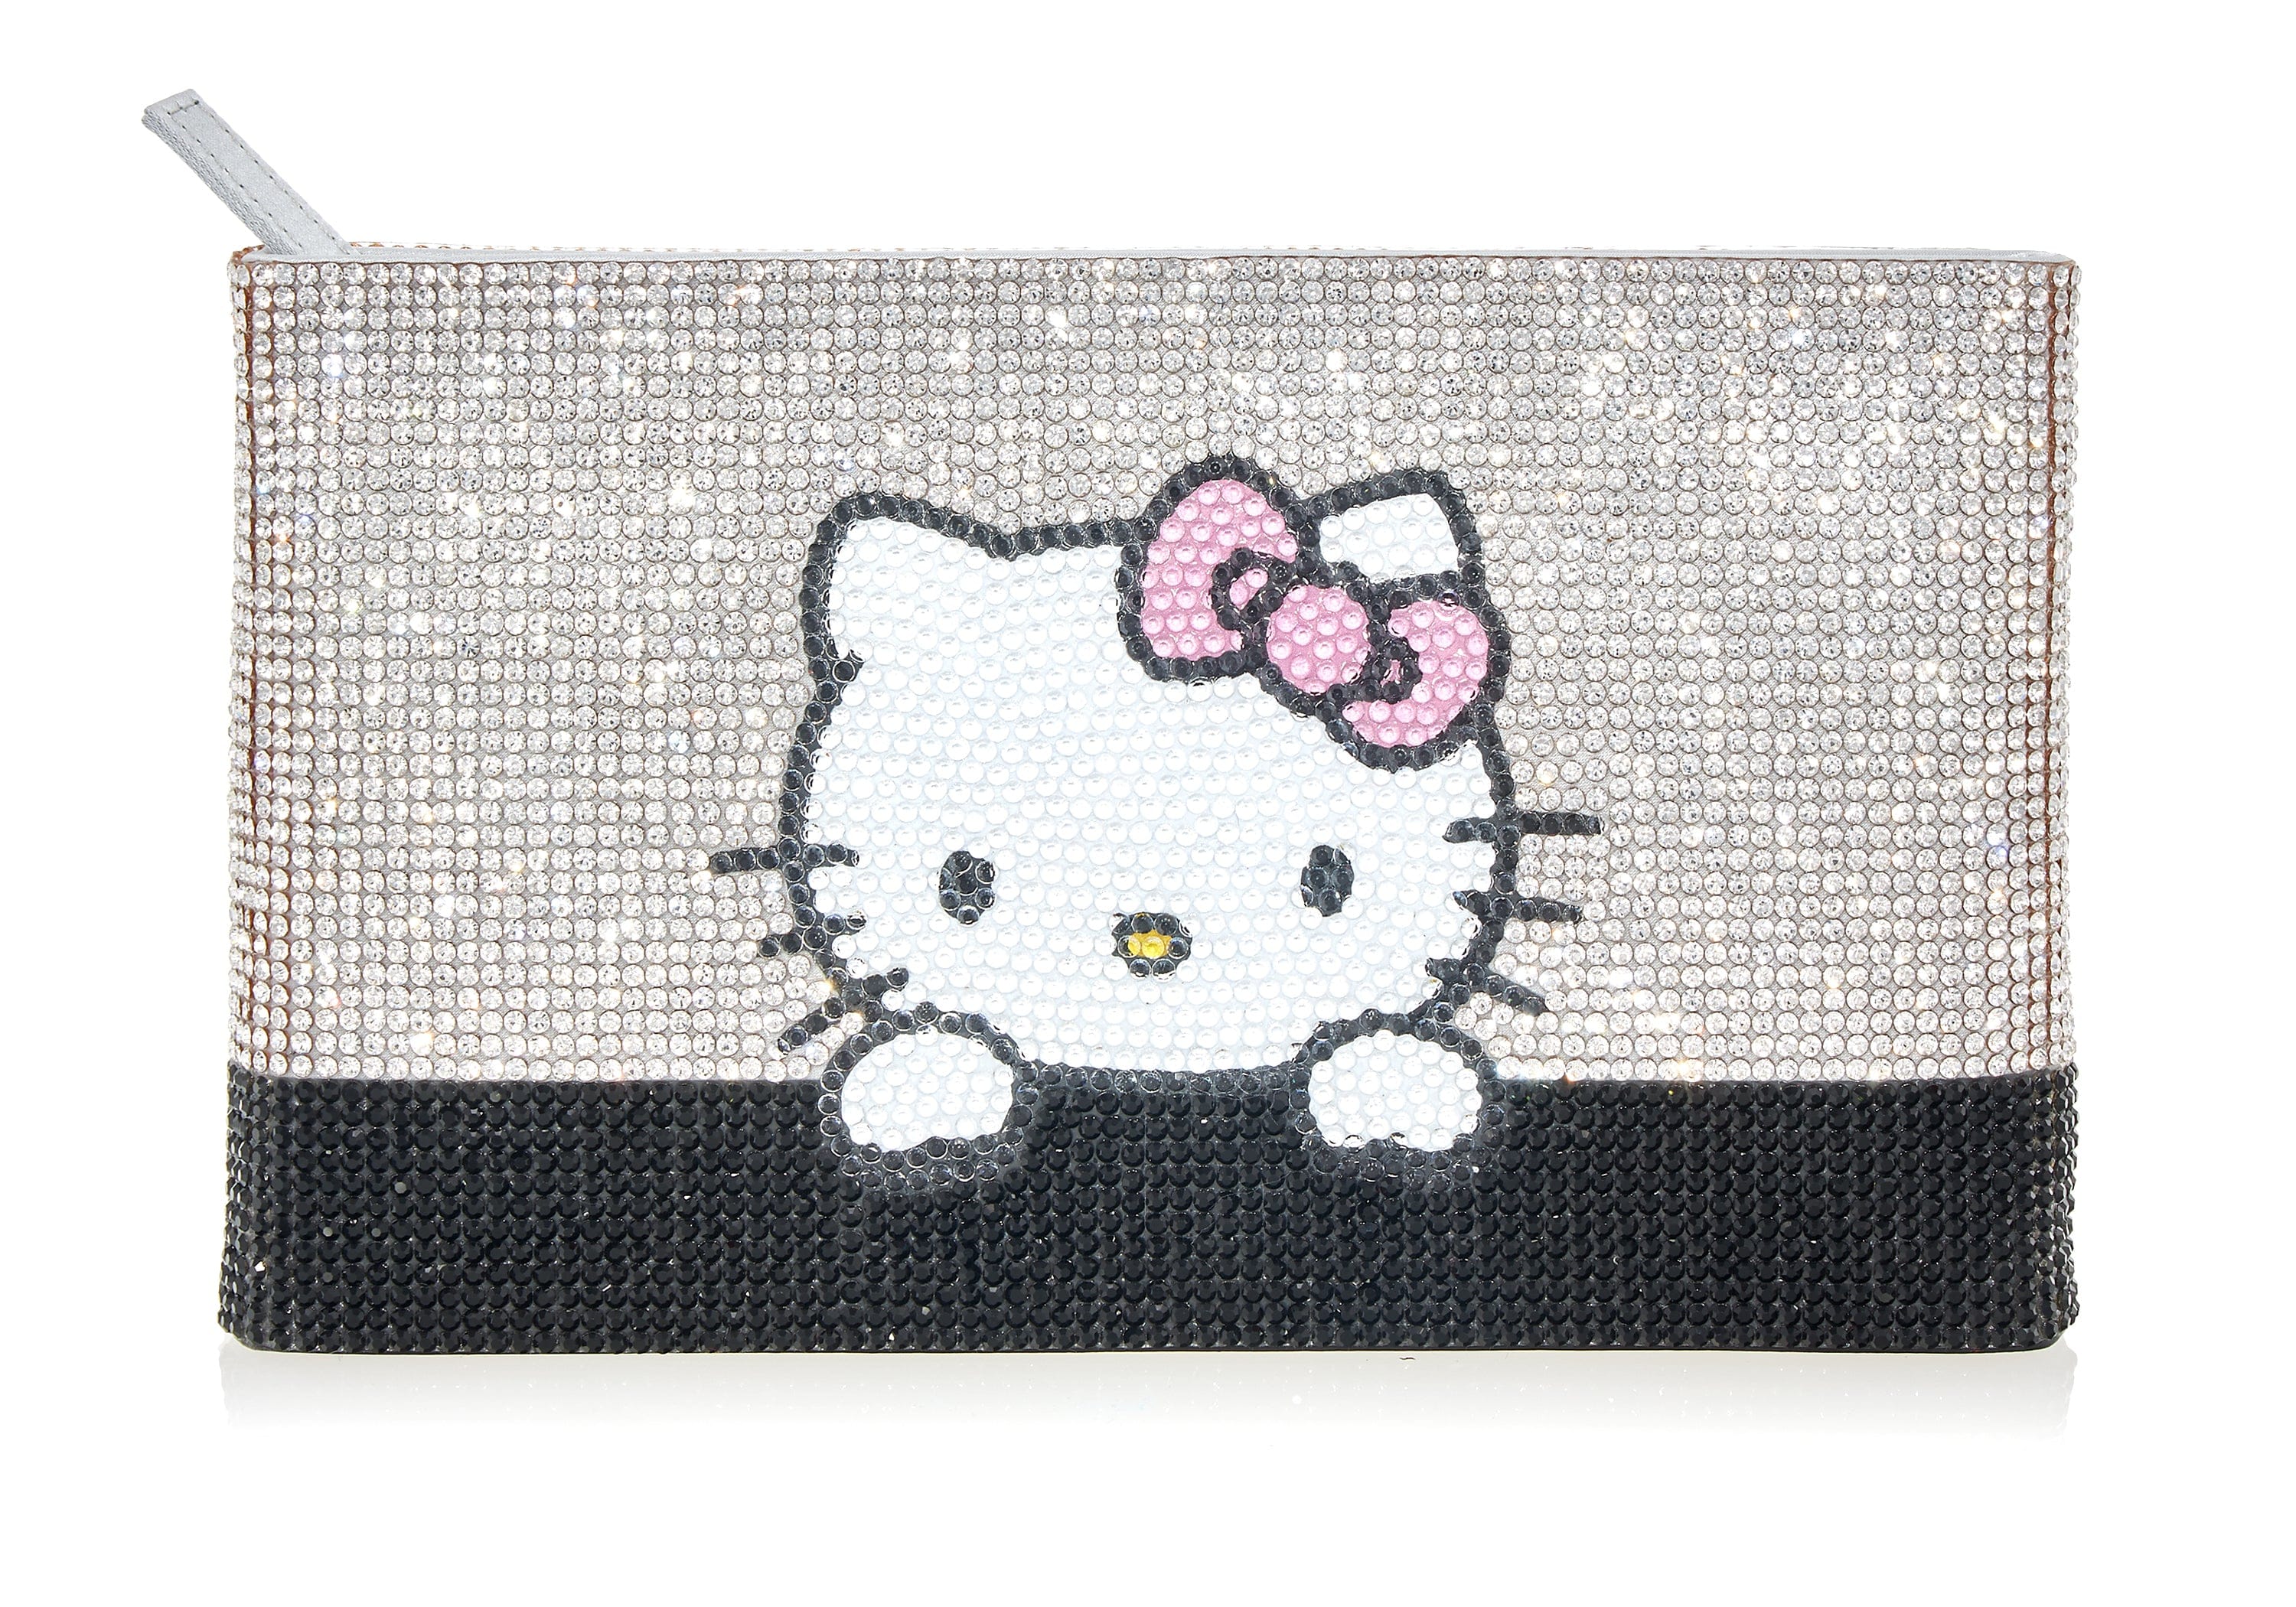 Judith Leiber x Hello Kitty Zip Pouch Pink Bow